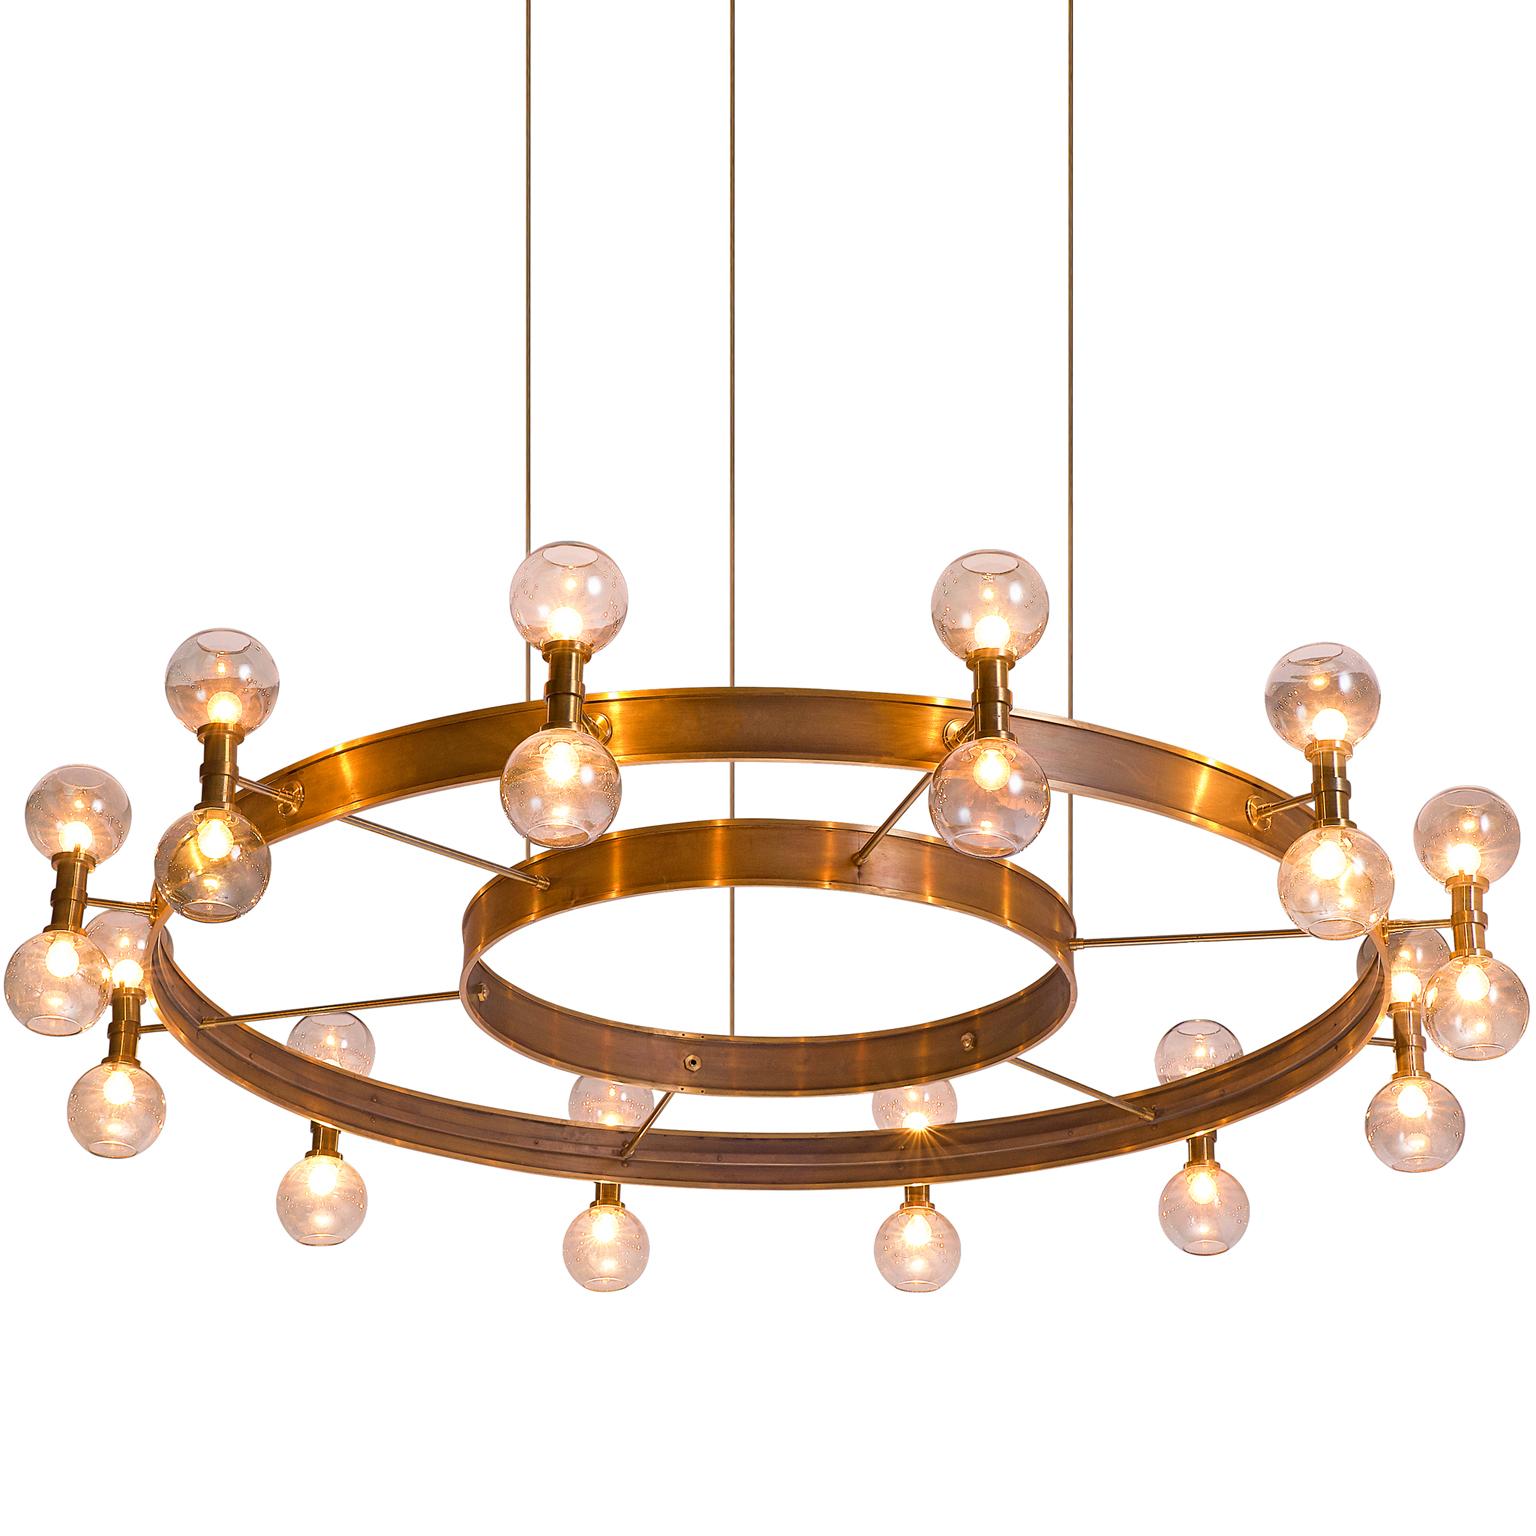 Carl Corwin Grand Chandelier with Brass Rings